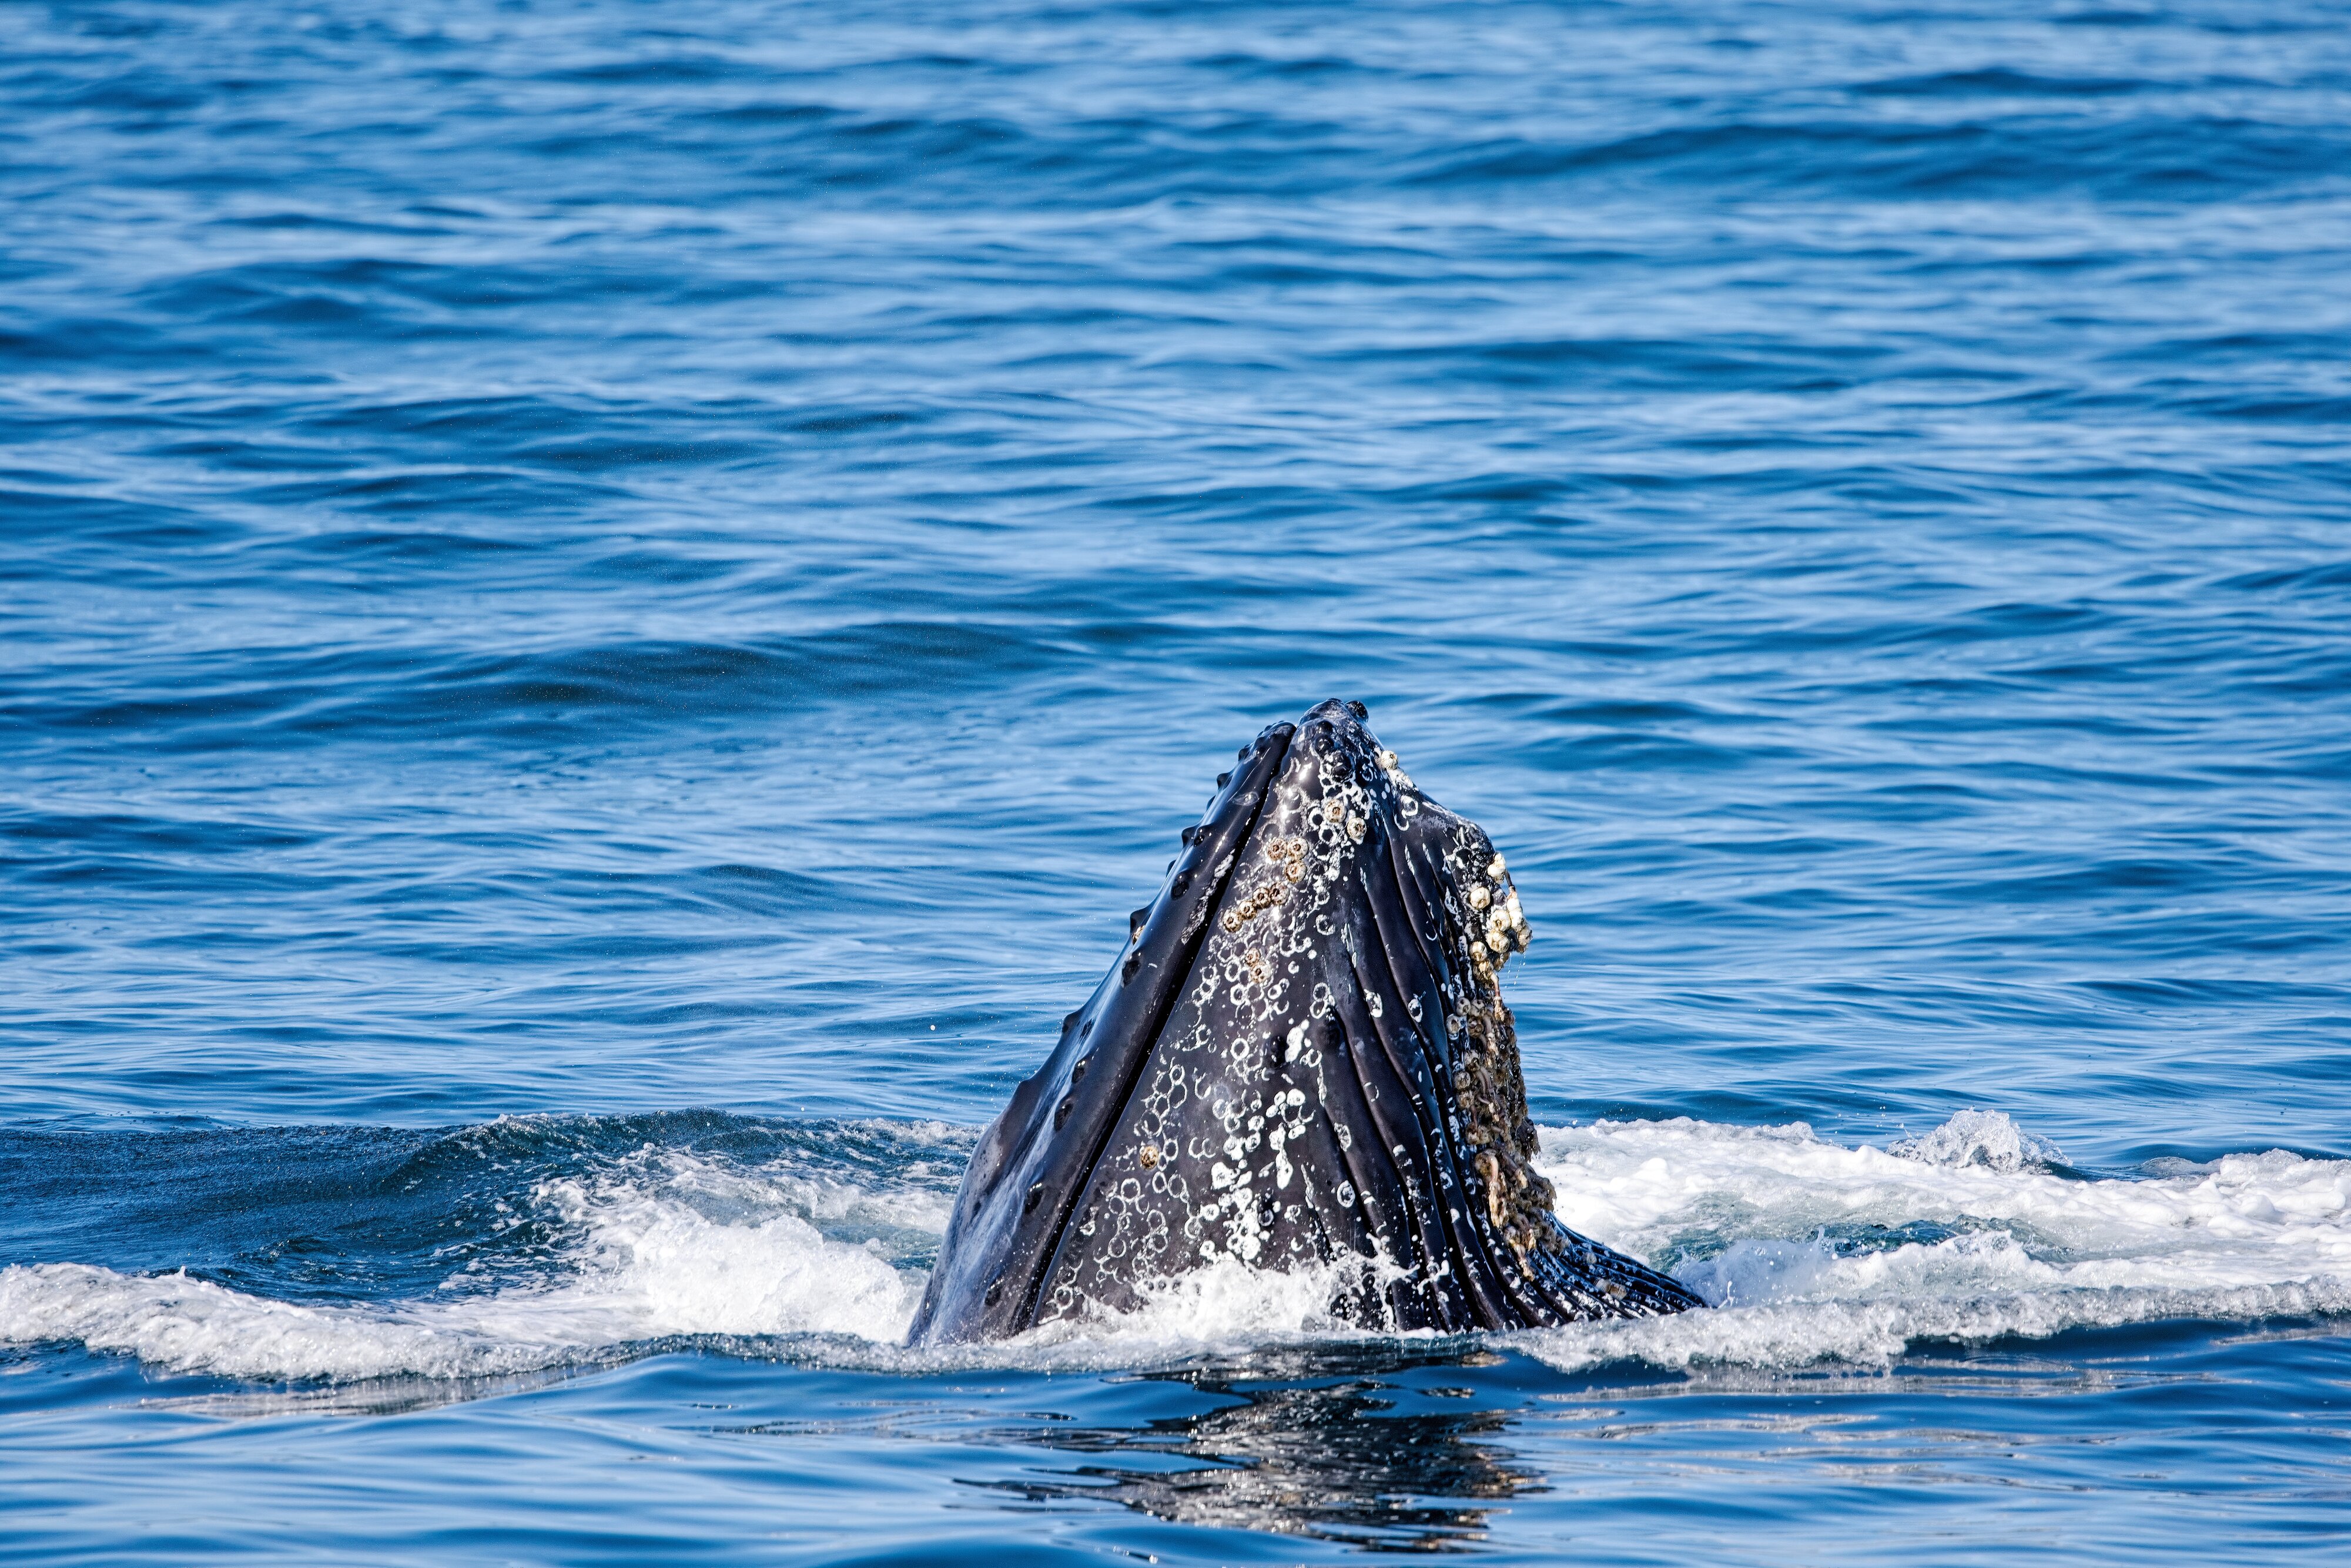 Humpback Whale lunge feeding in Monterey Bay